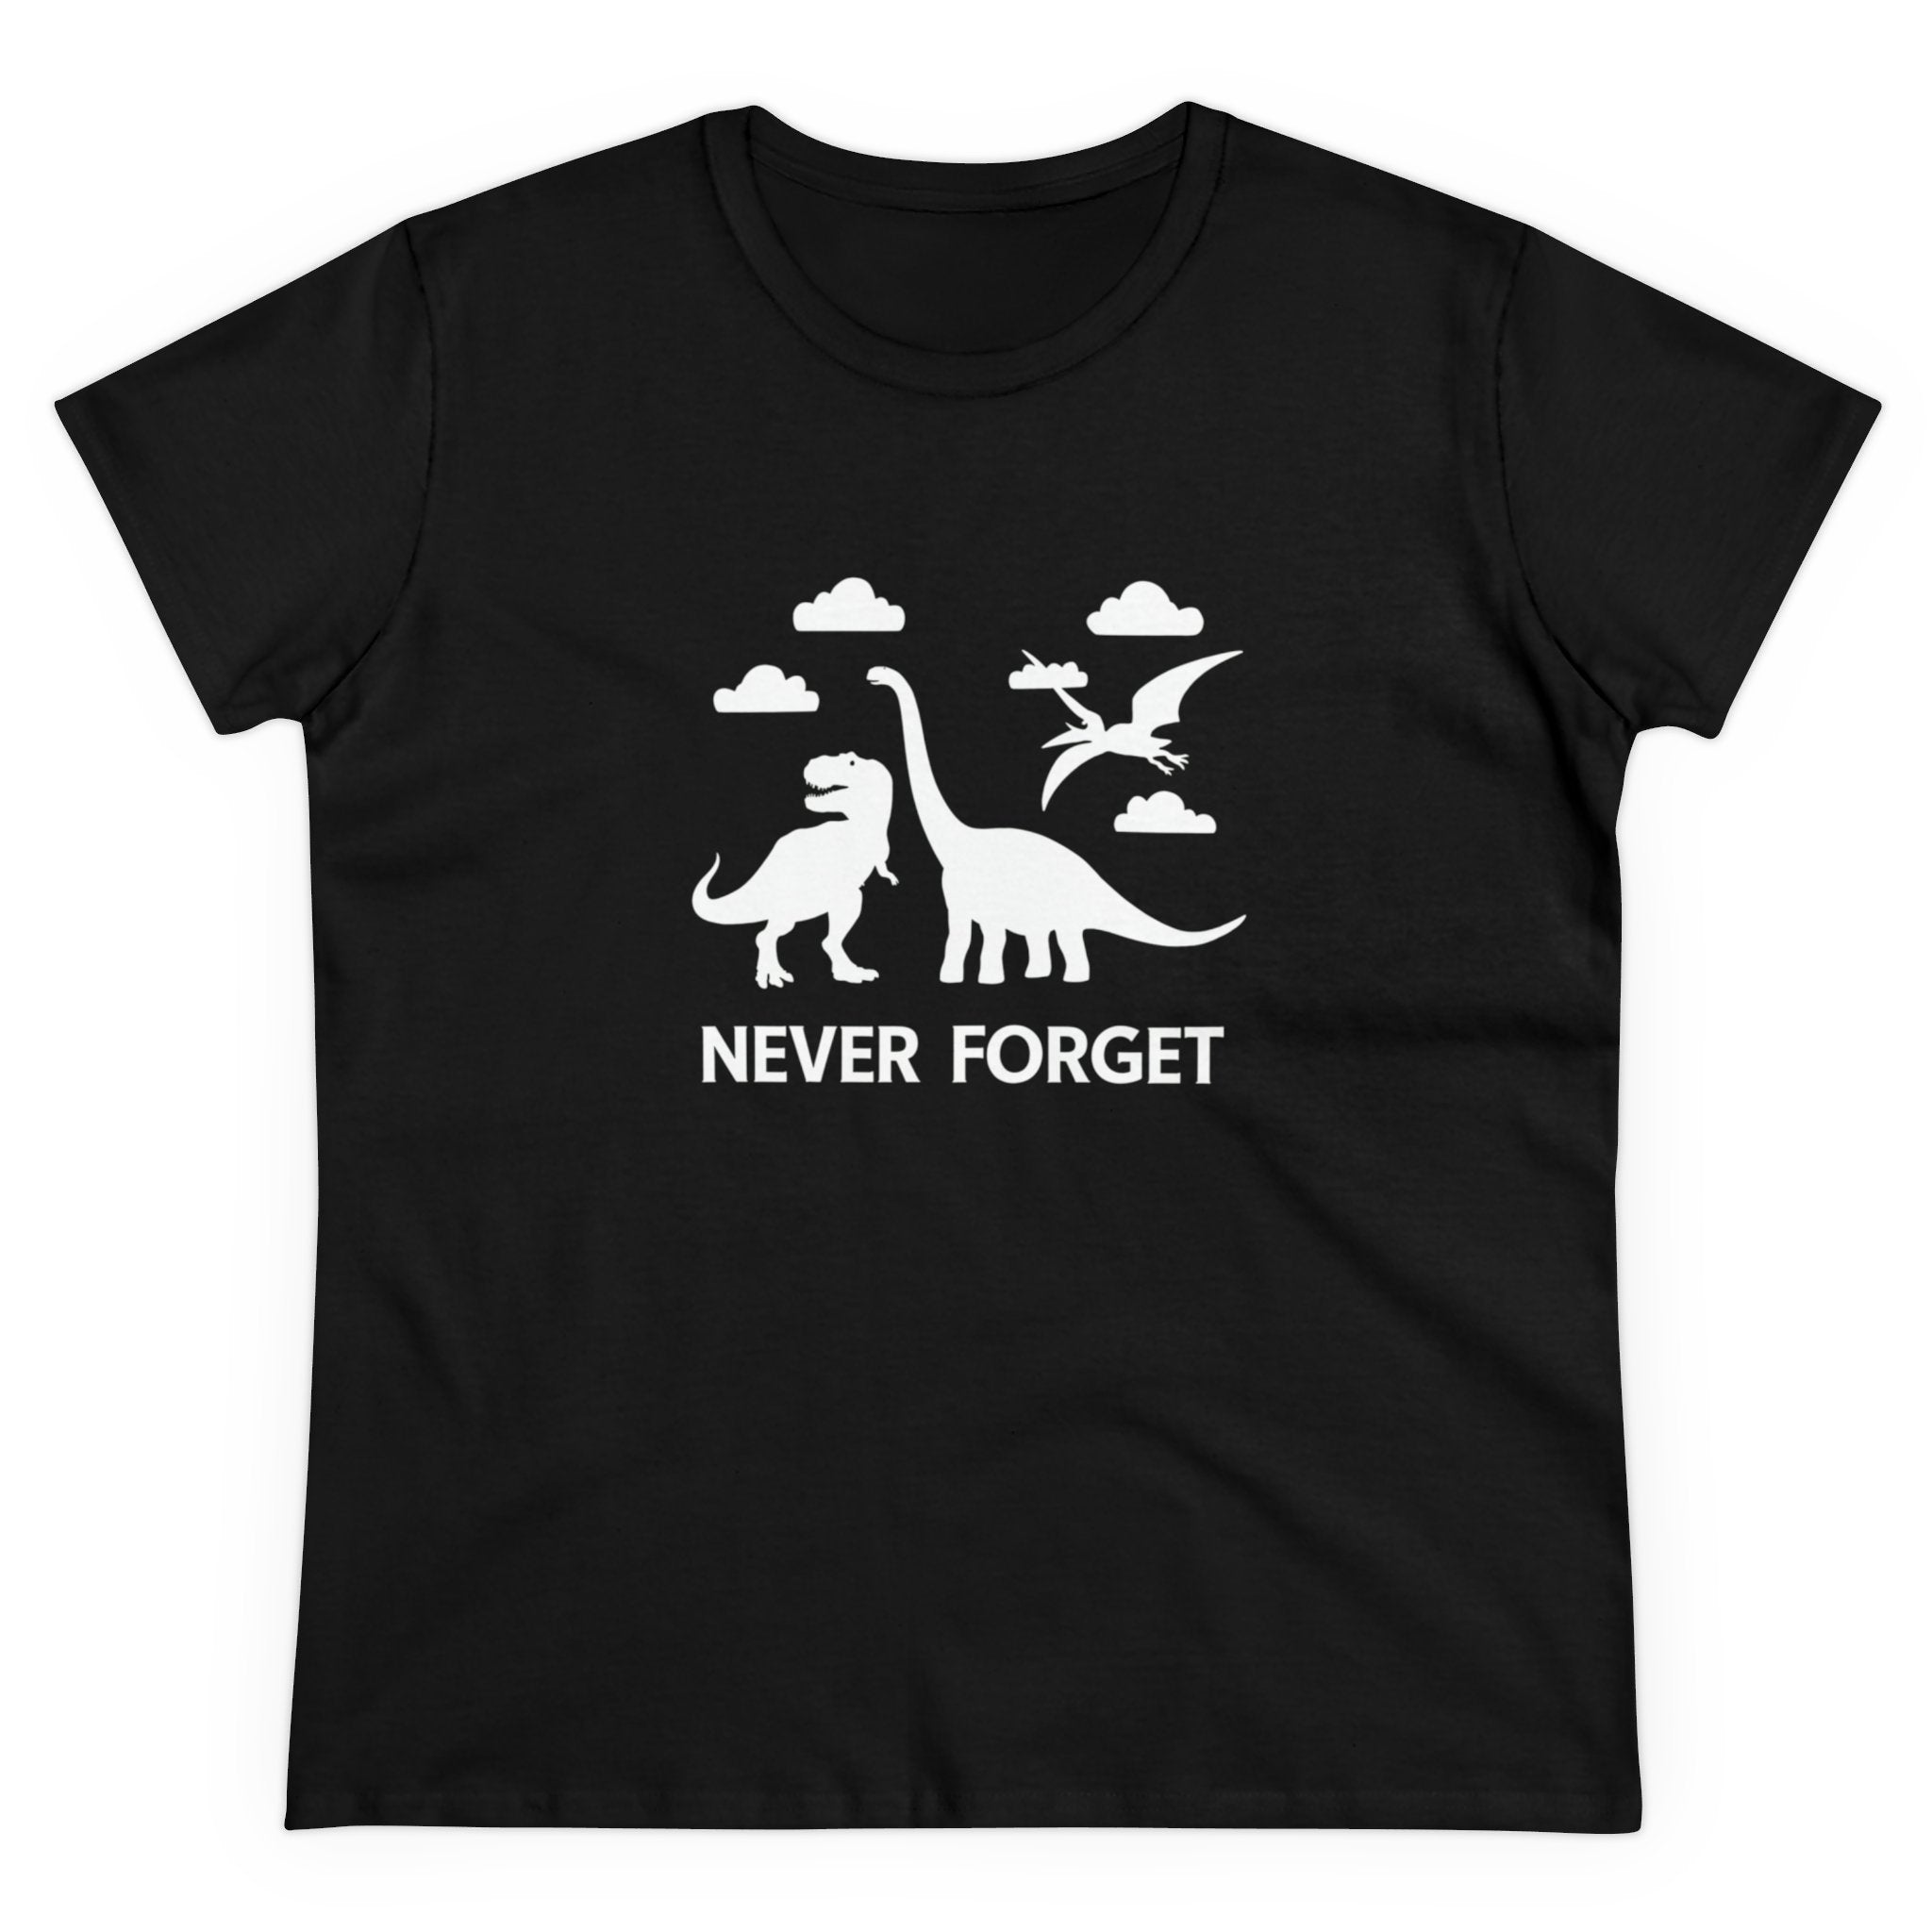 The Never Forget - Women's Tee is a black t-shirt made of soft cotton, featuring white silhouettes of various dinosaurs and the text "NEVER FORGET." This stylish tee also includes cap sleeves for an extra touch of comfort.